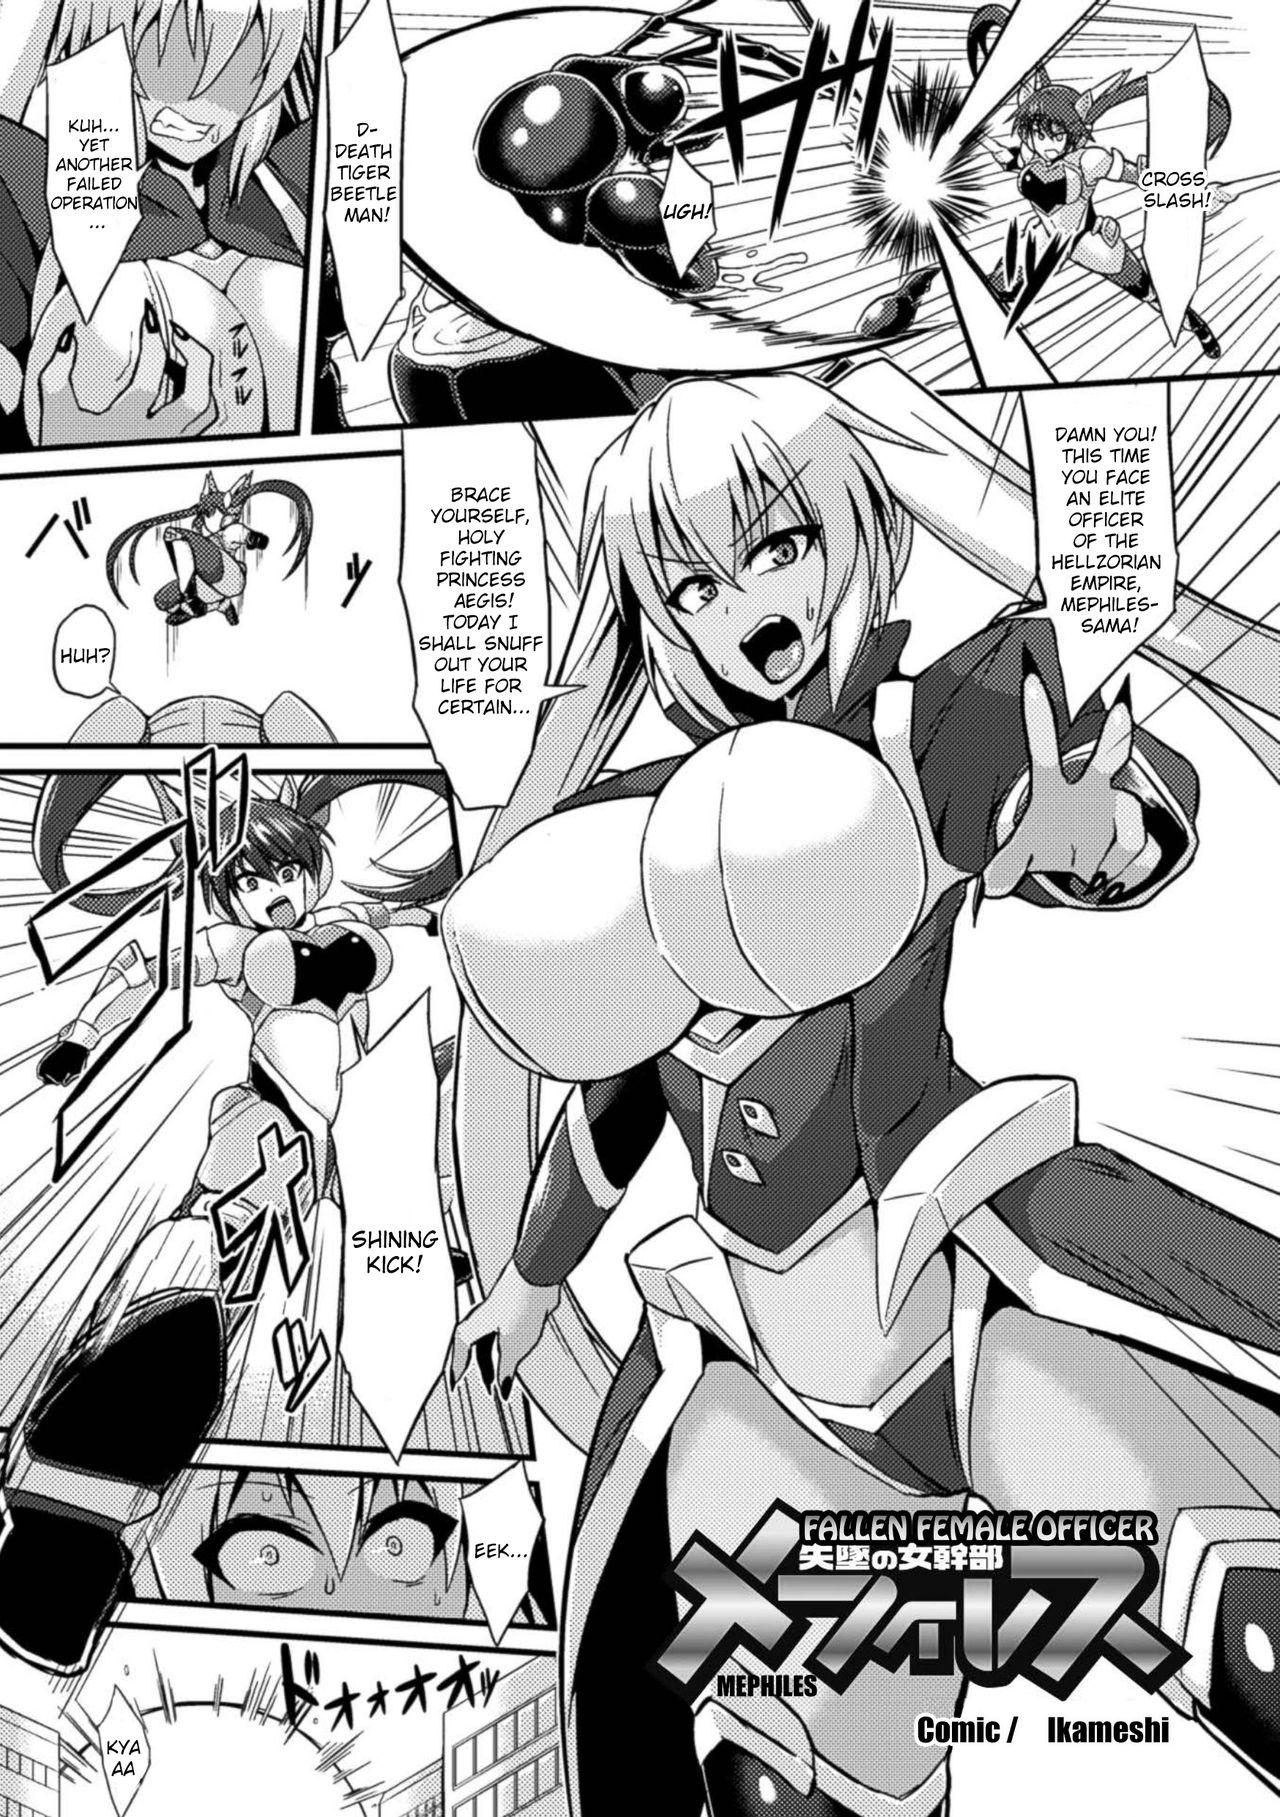 Sexcam Fallen Female Officer Mephiles Muscular - Page 1